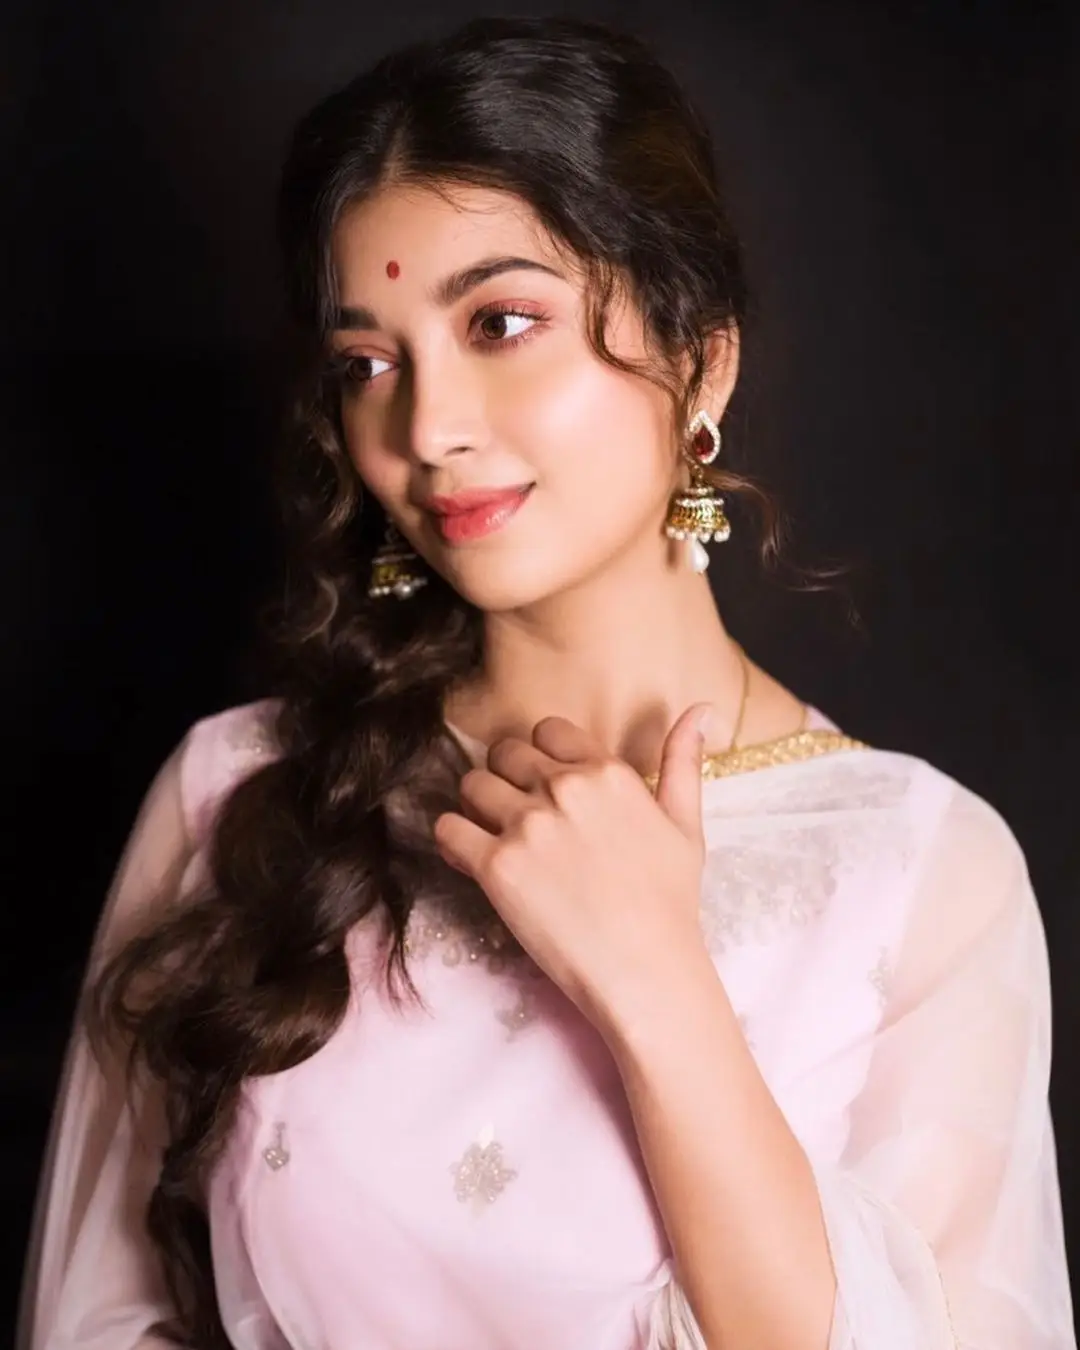 Digangana Suryavanshi Mesmerizes With Her Cute Smile